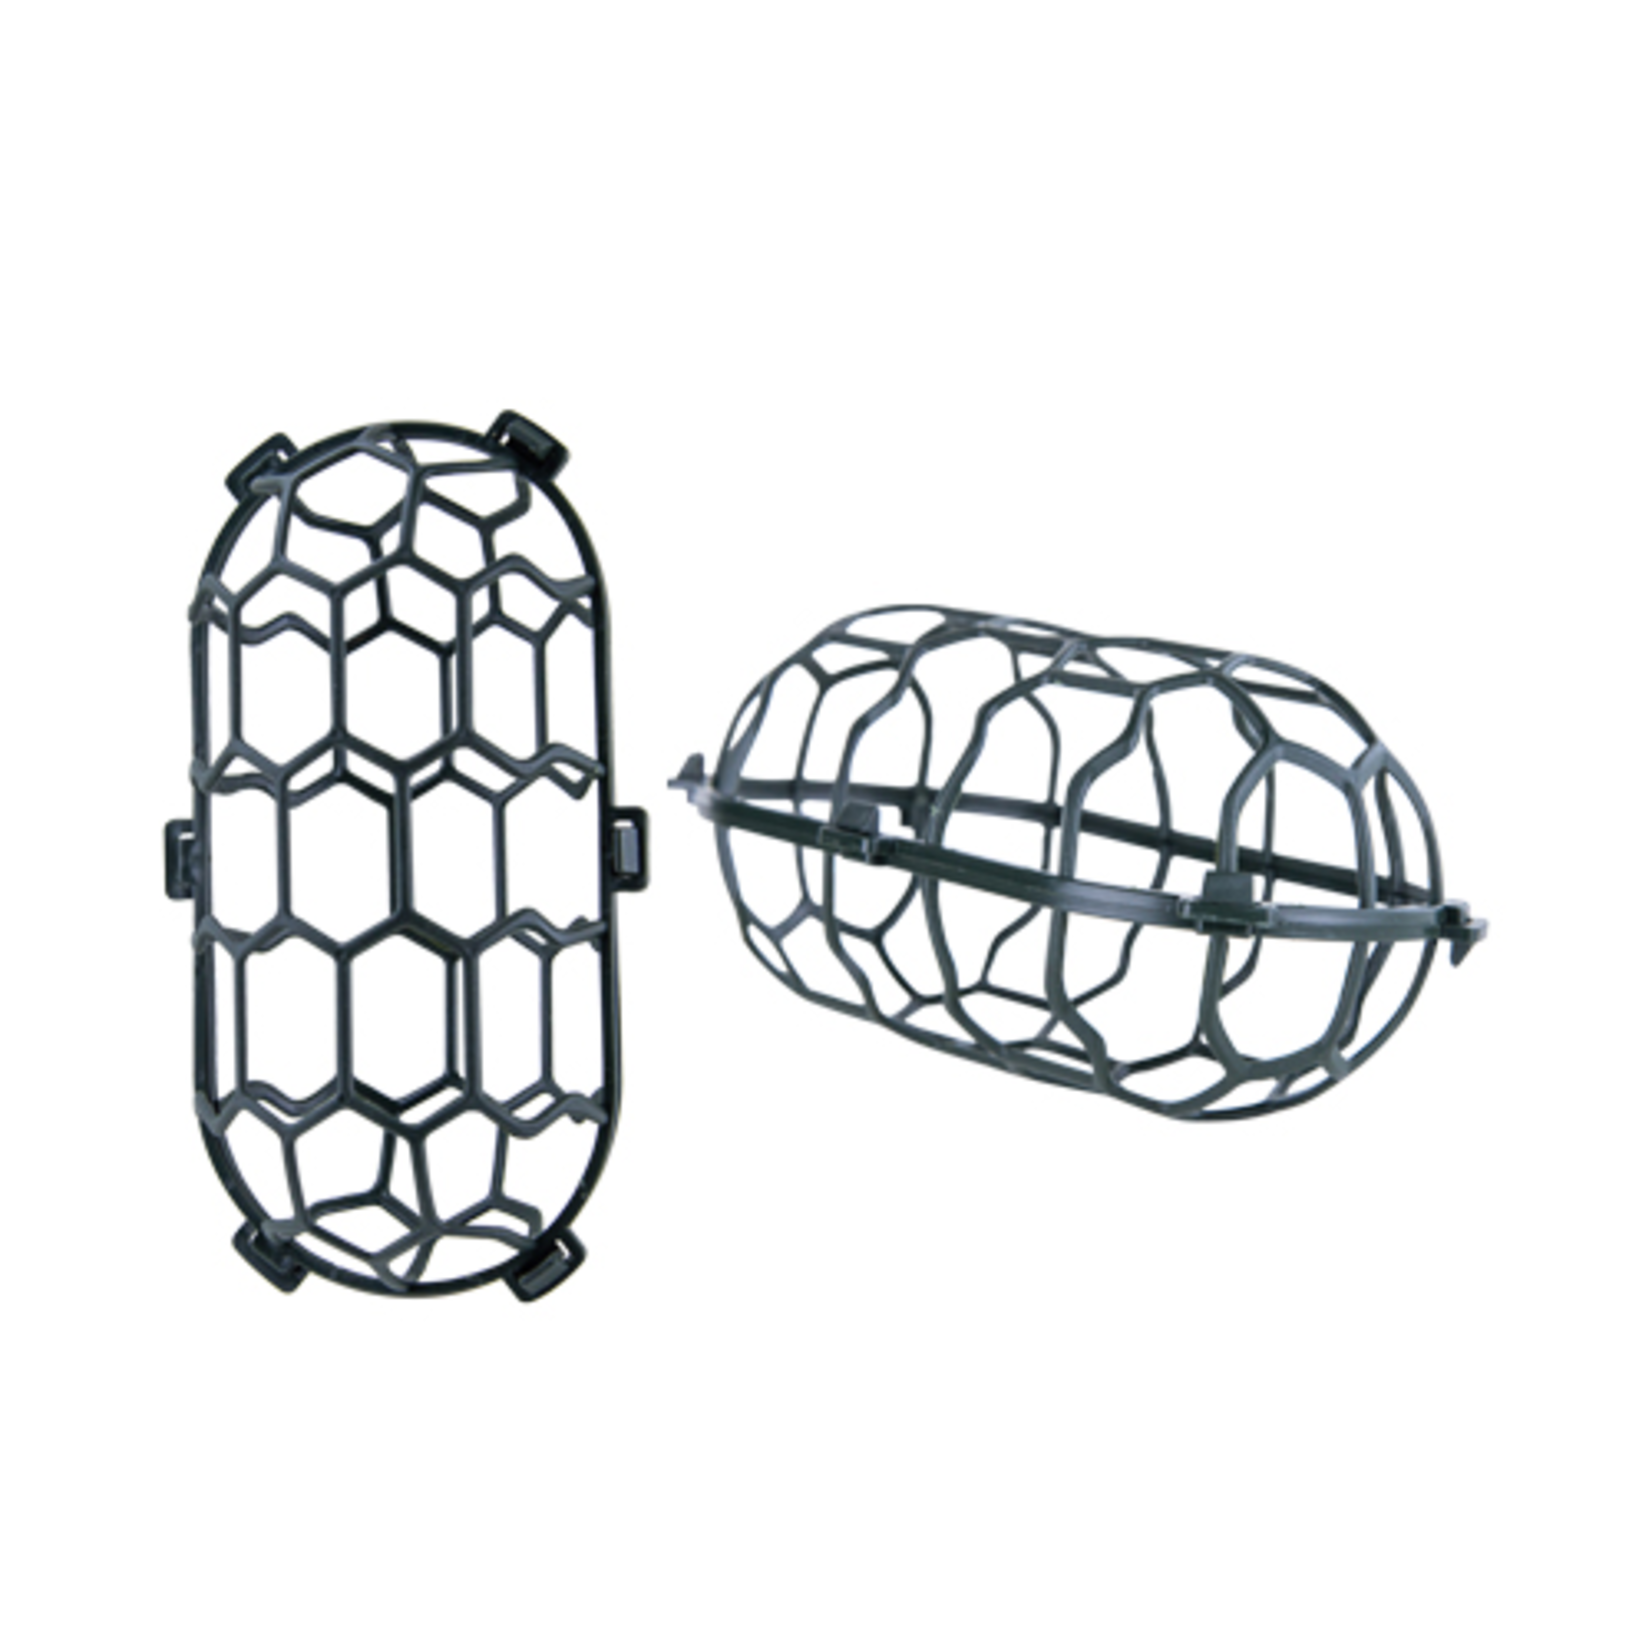 6” EGG CAGE